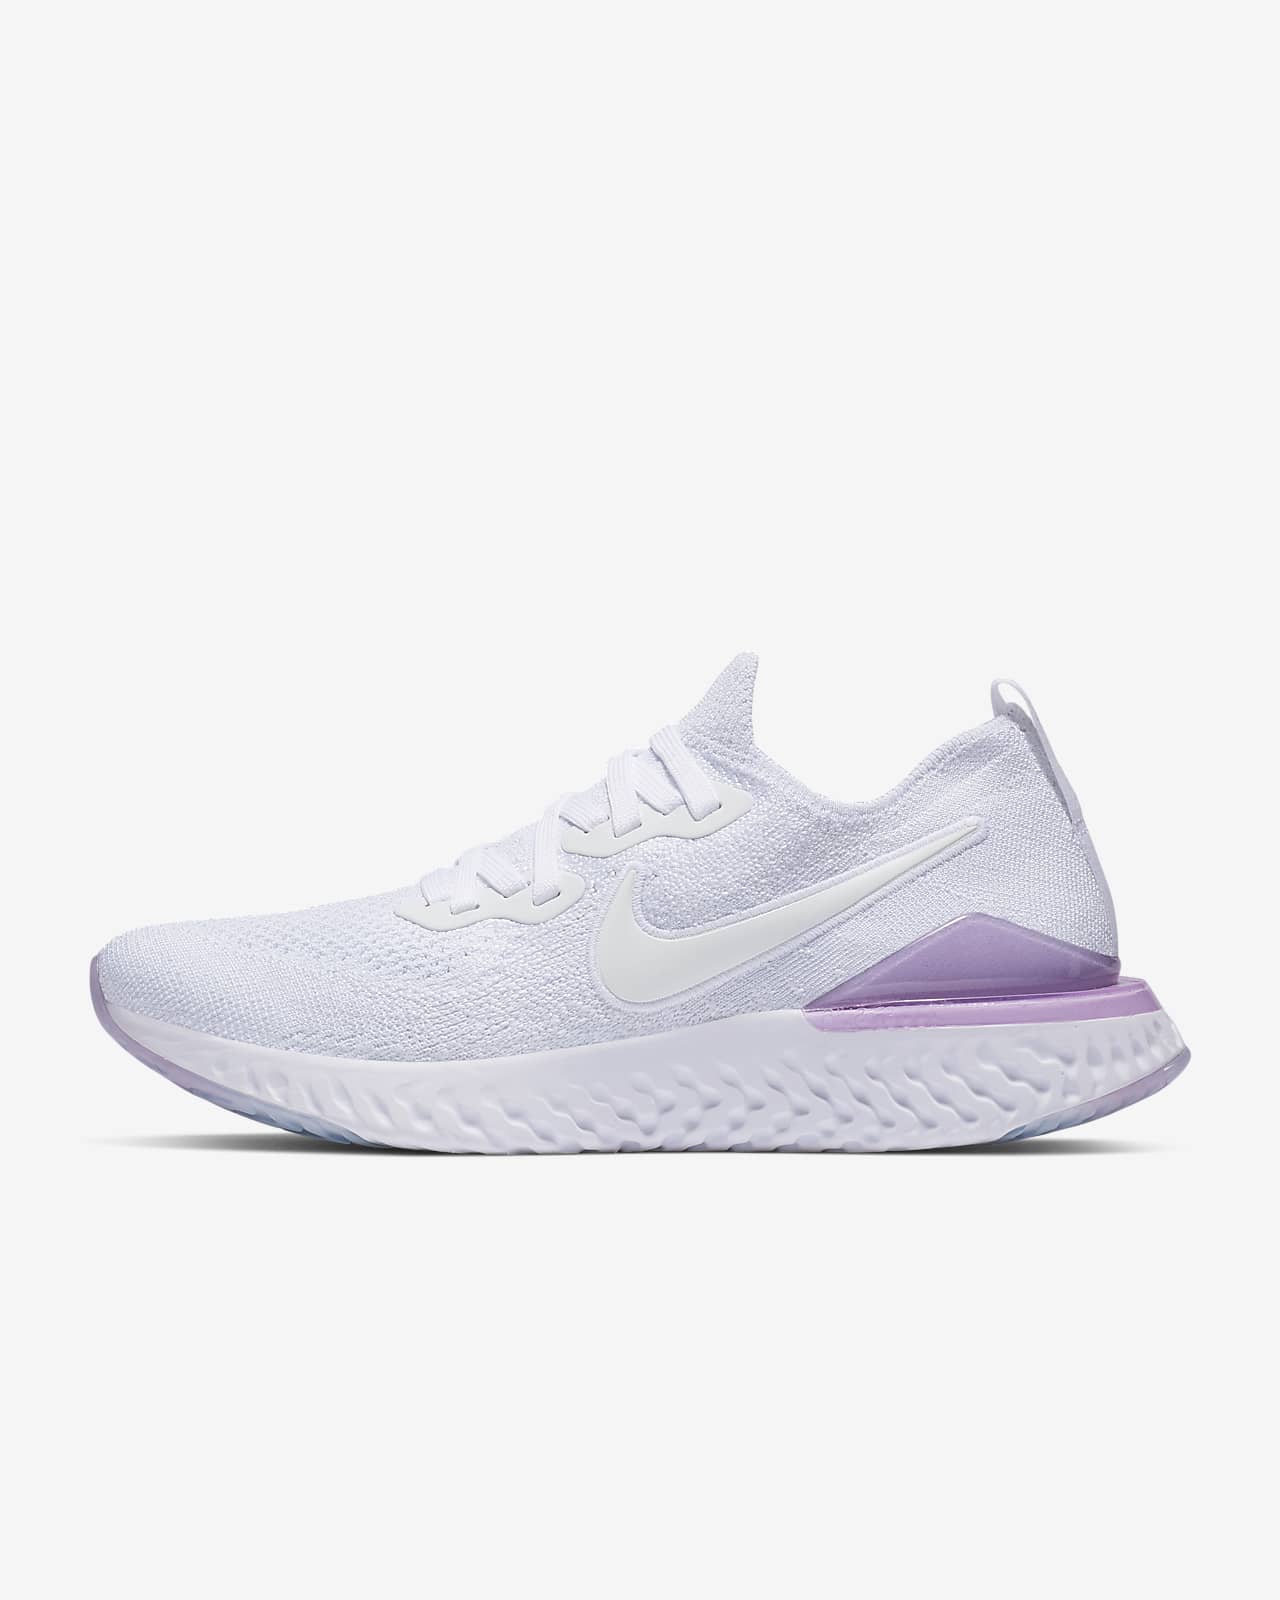 Nike Epic React Flynit Netherlands, 51% - thecocktail-clinic.com